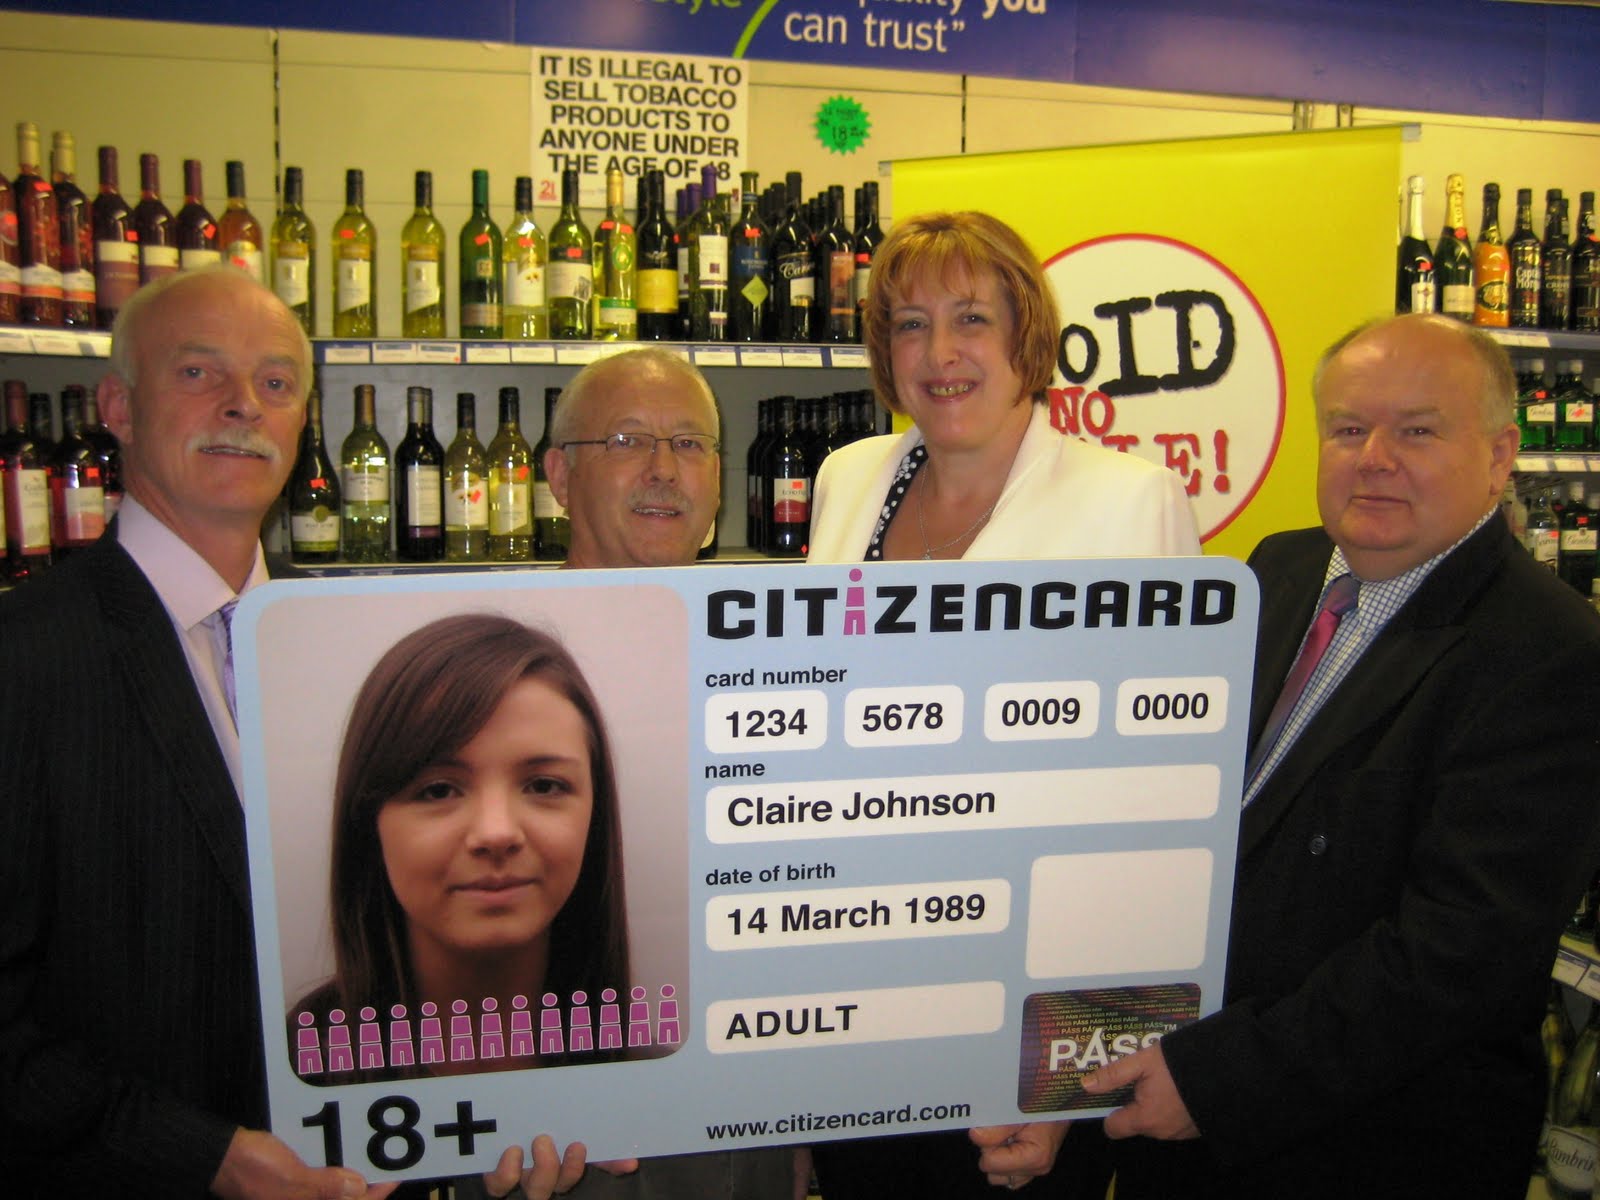 Yvonne Fovargue : ‘No ID, No Sale’ policy to stop children buying alcohol and tobacco.